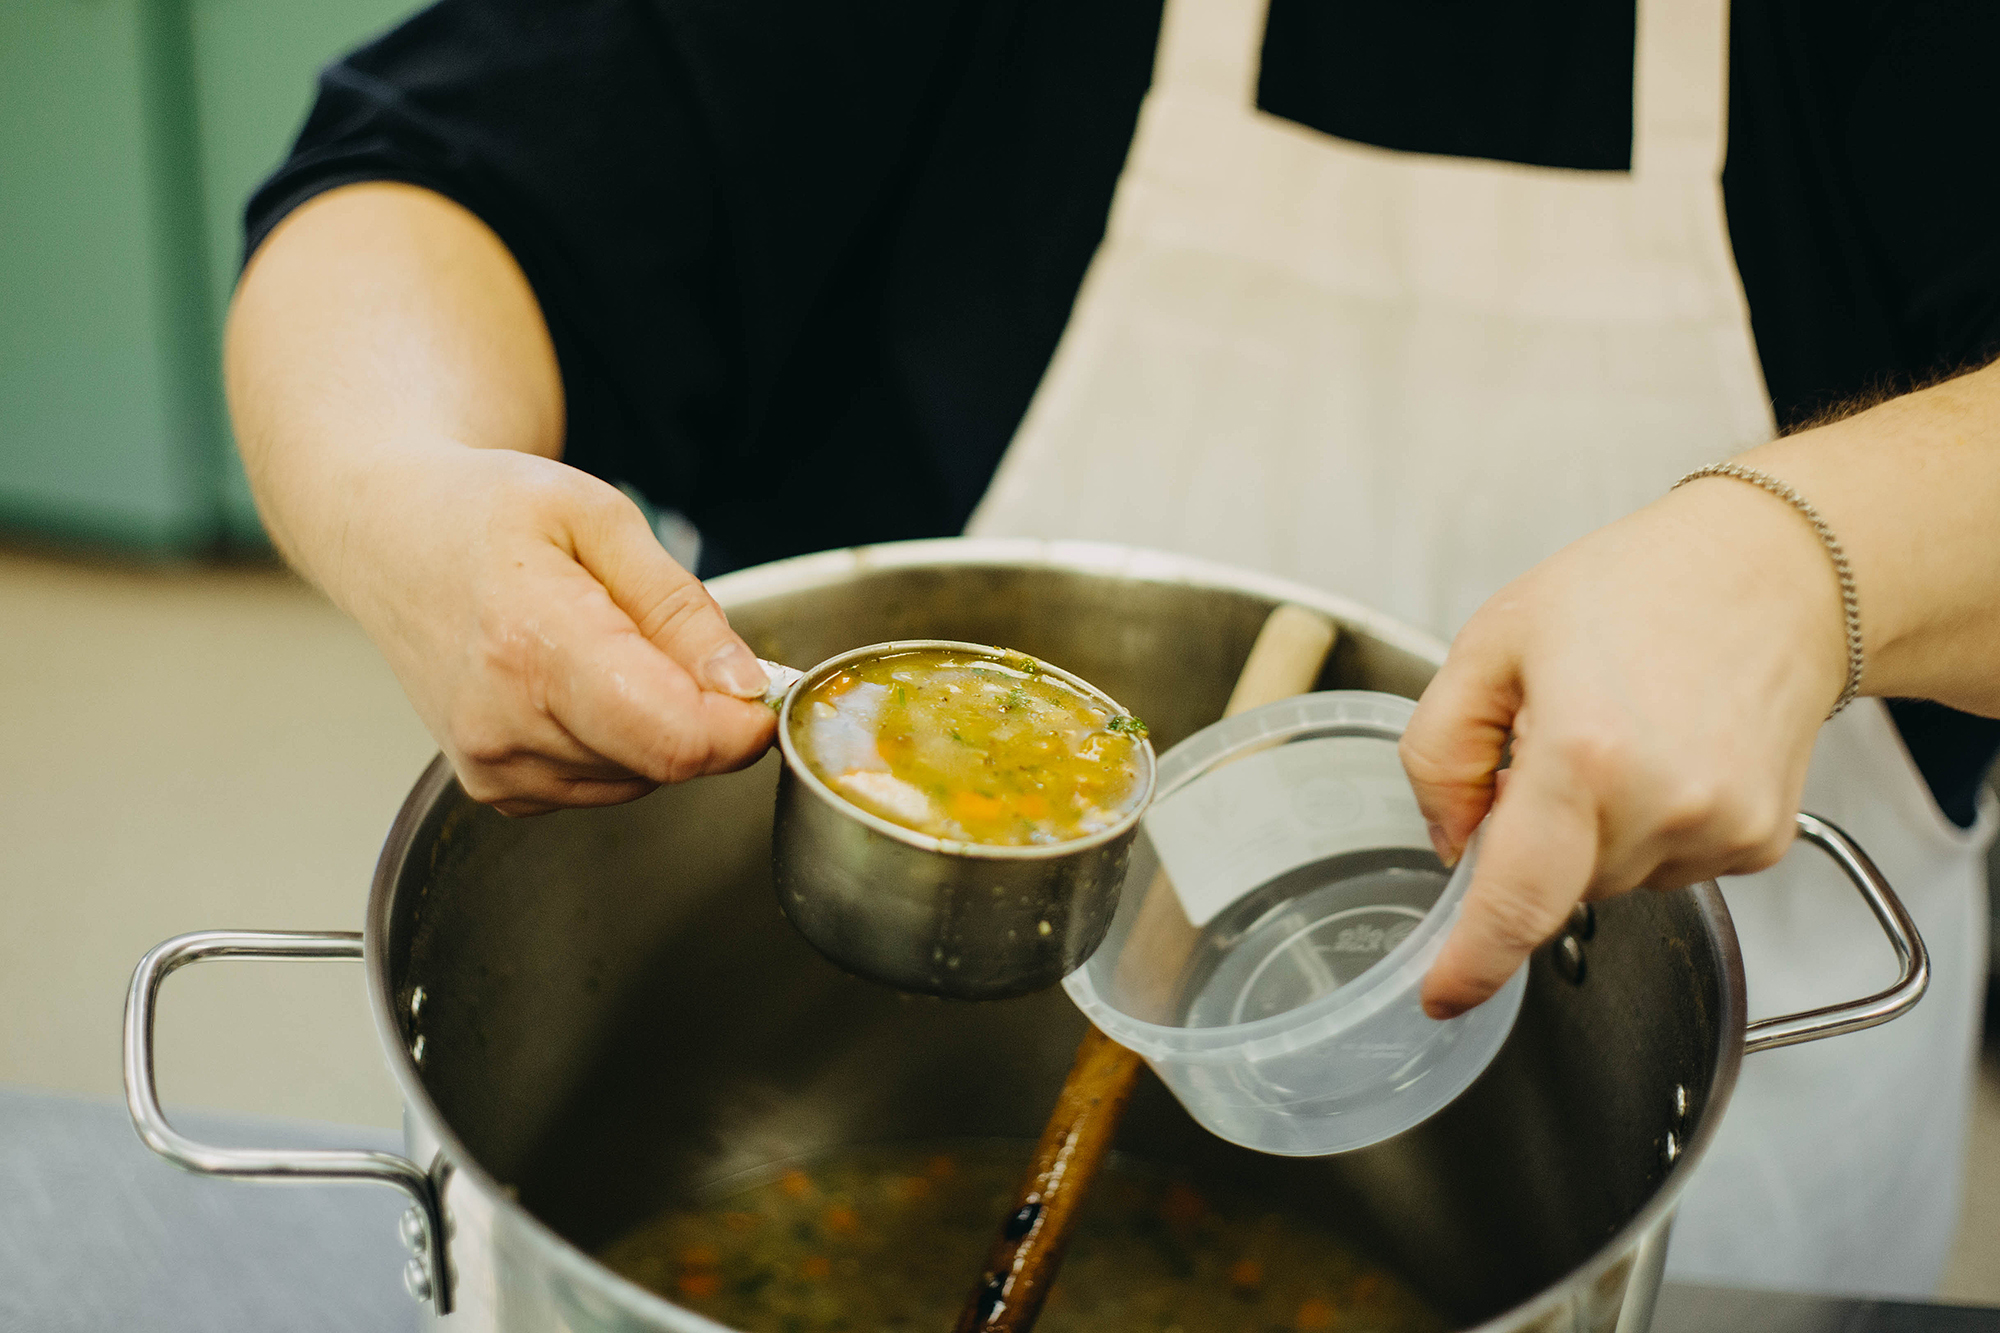 Staff member putting soup from pot into container.